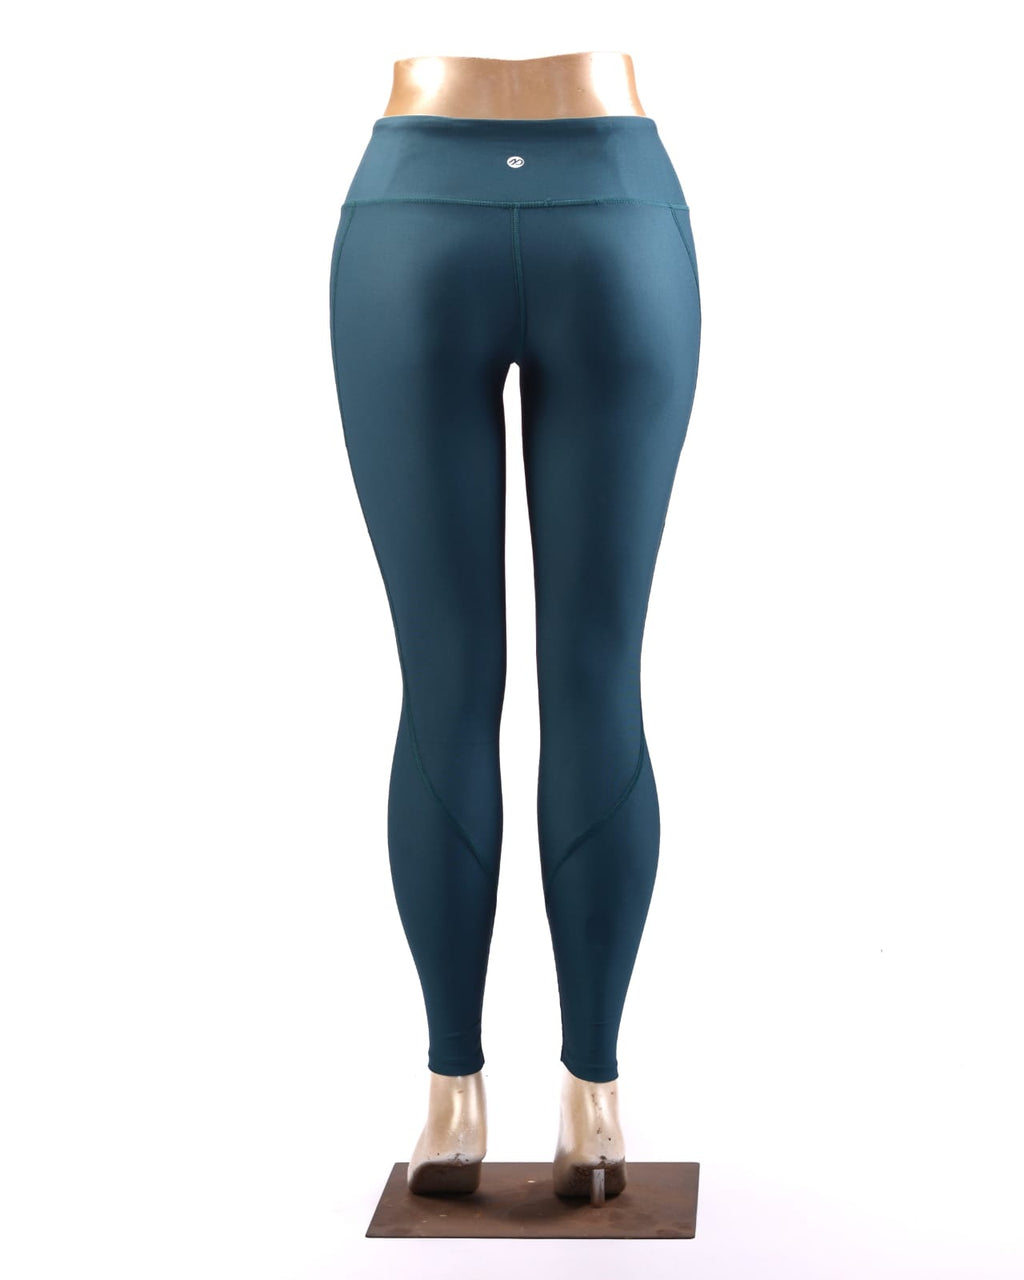 Shop Prisma's Deep Orchid Ankle Leggings for Comfort & Style